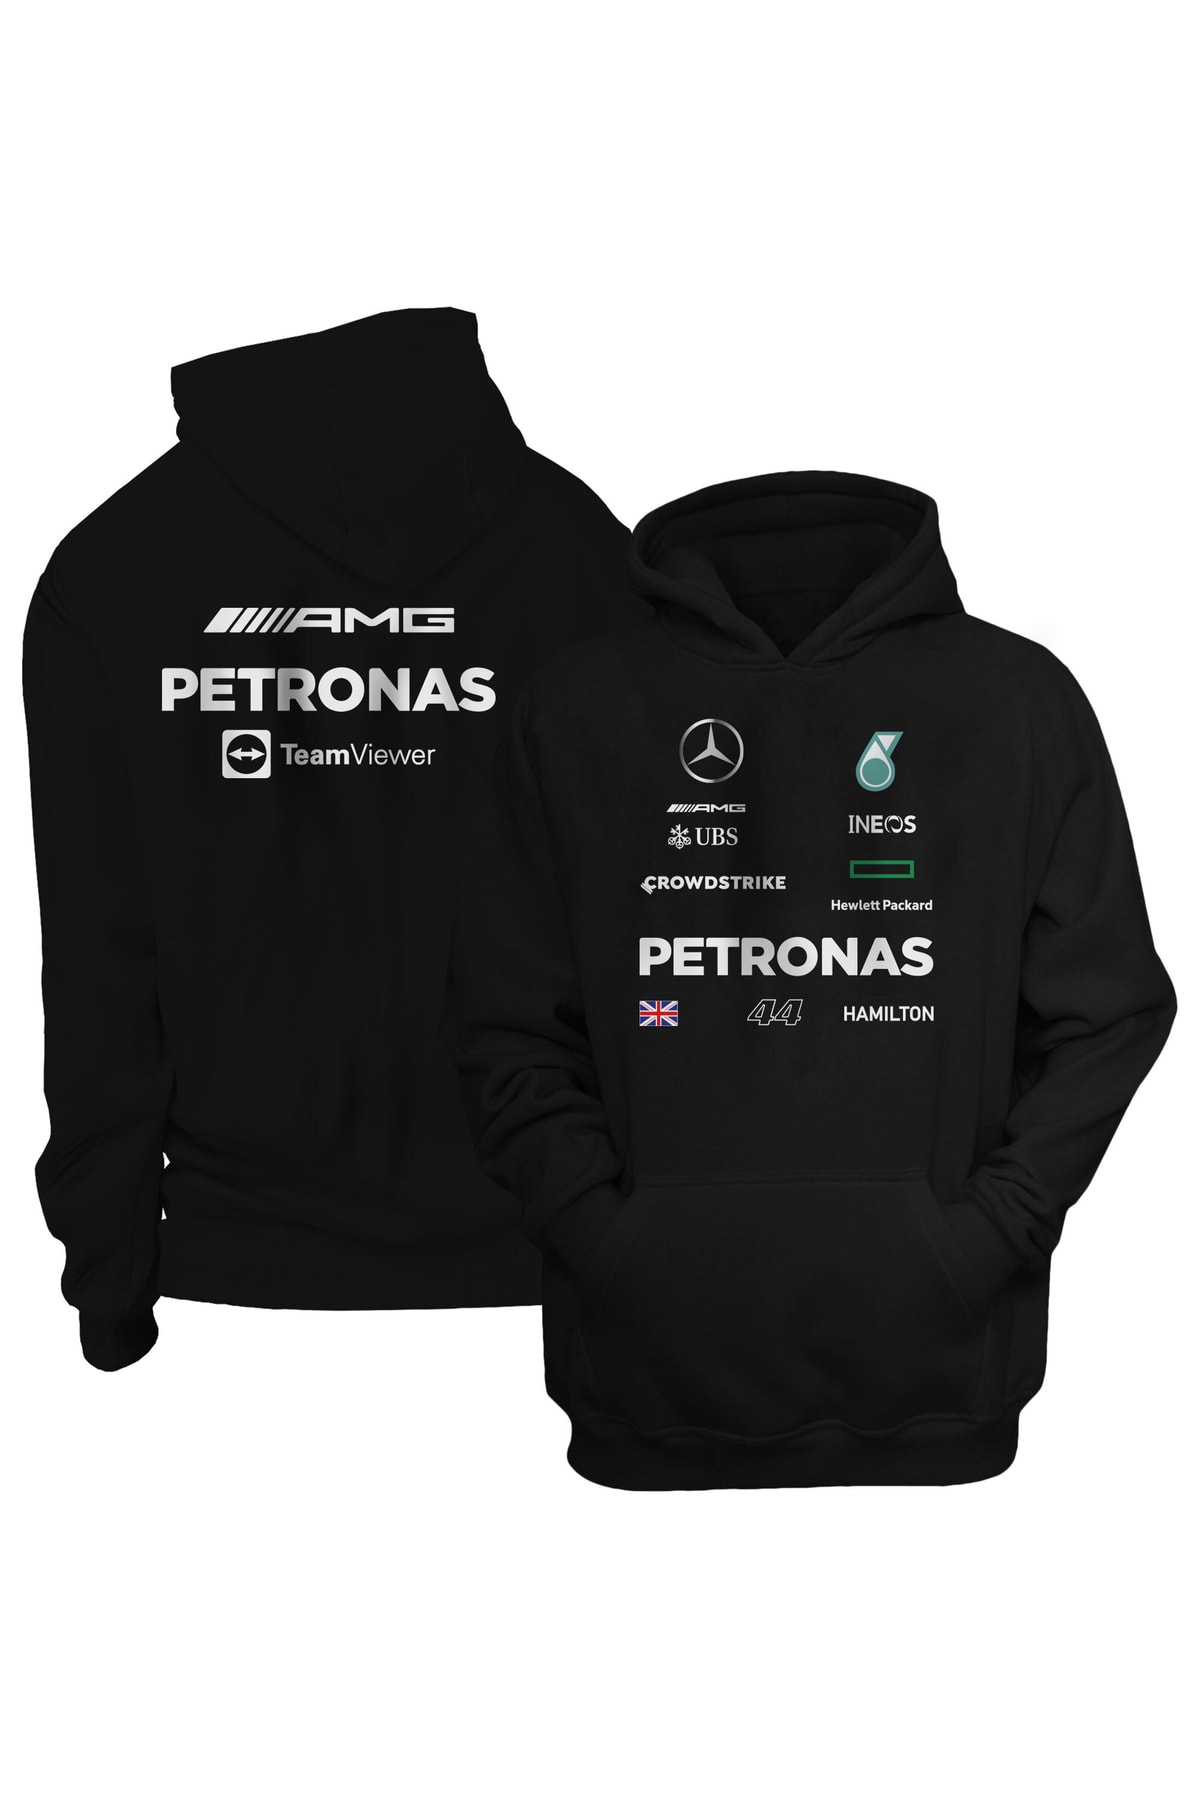 usateamfans Lewis Hamilton Hoodie BY6046